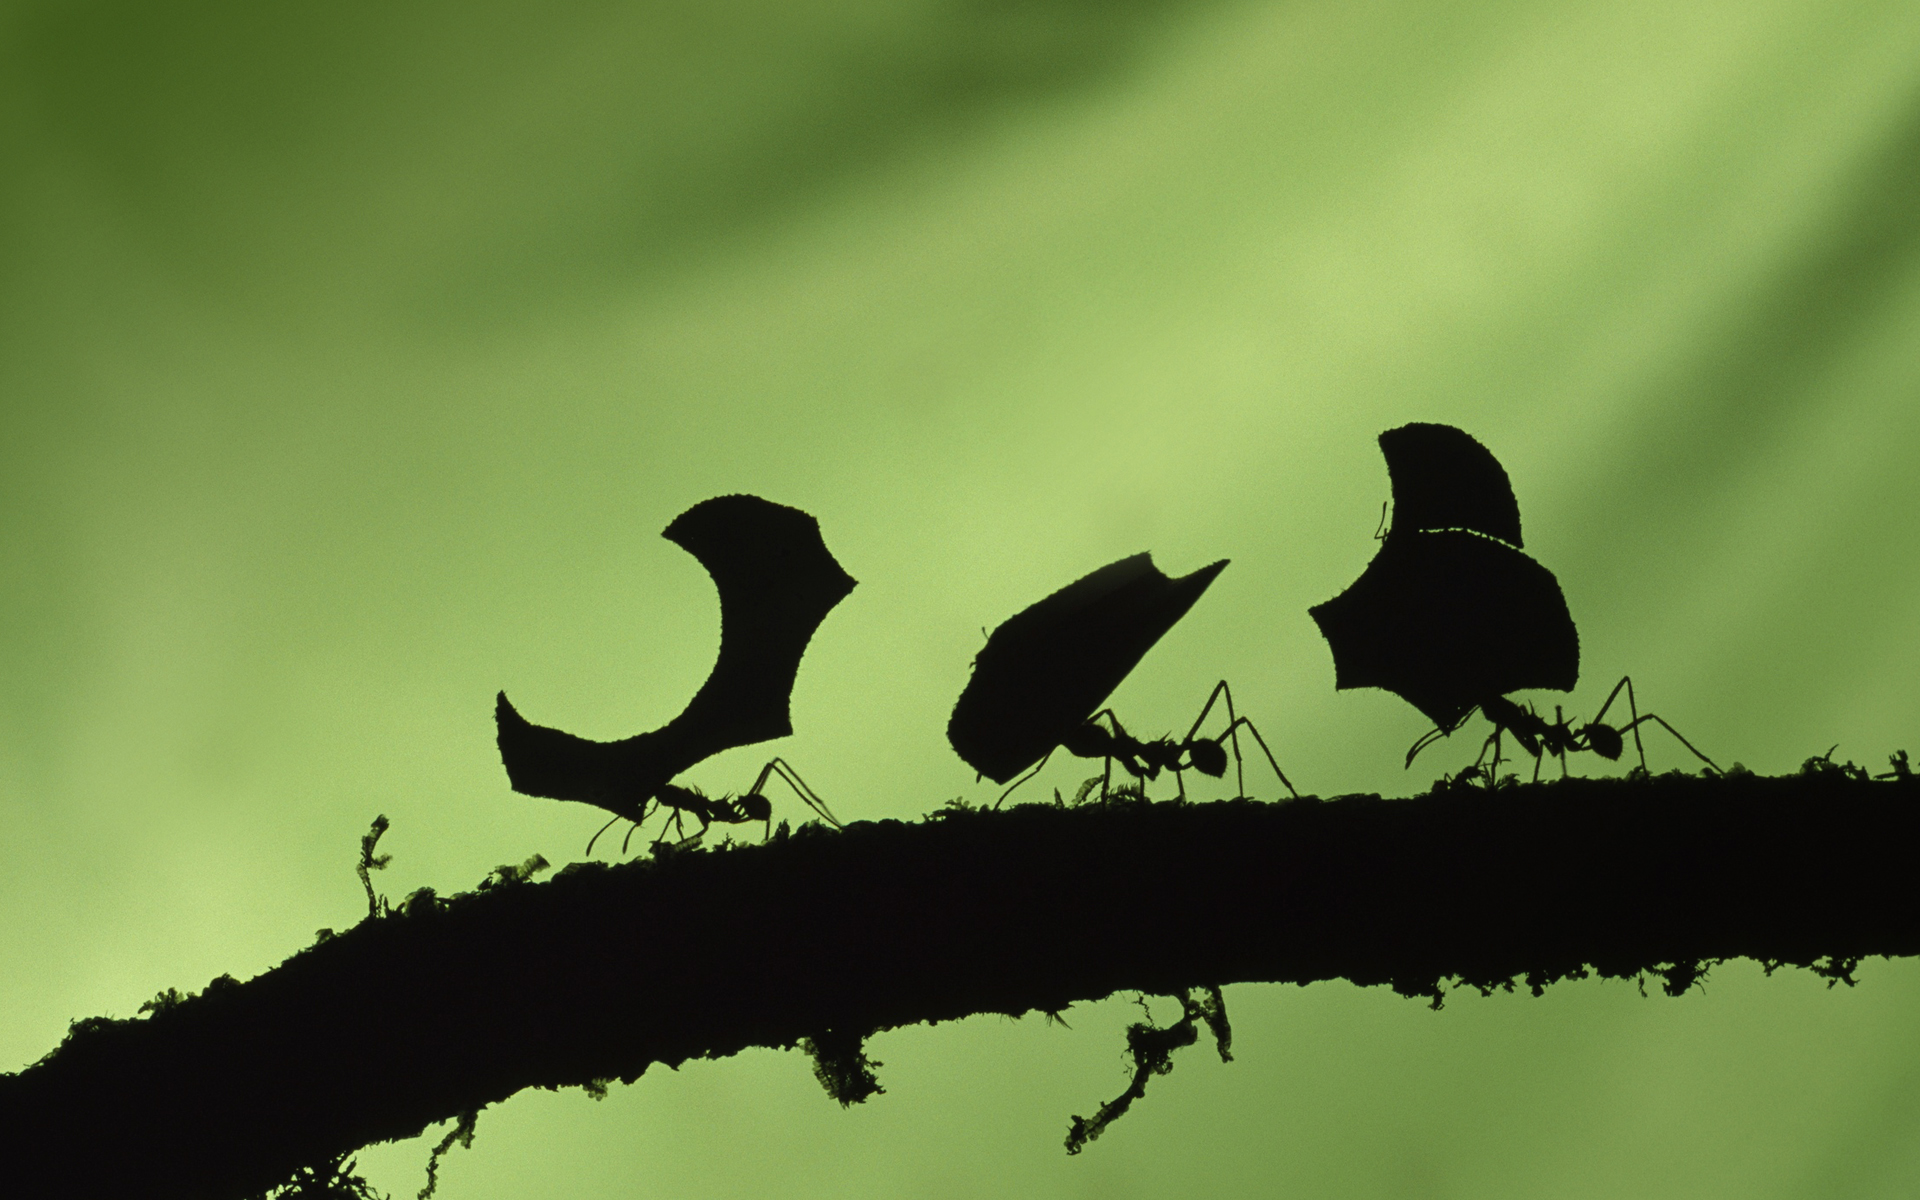 insects, ants, leaves, silhouettes, branches - desktop wallpaper